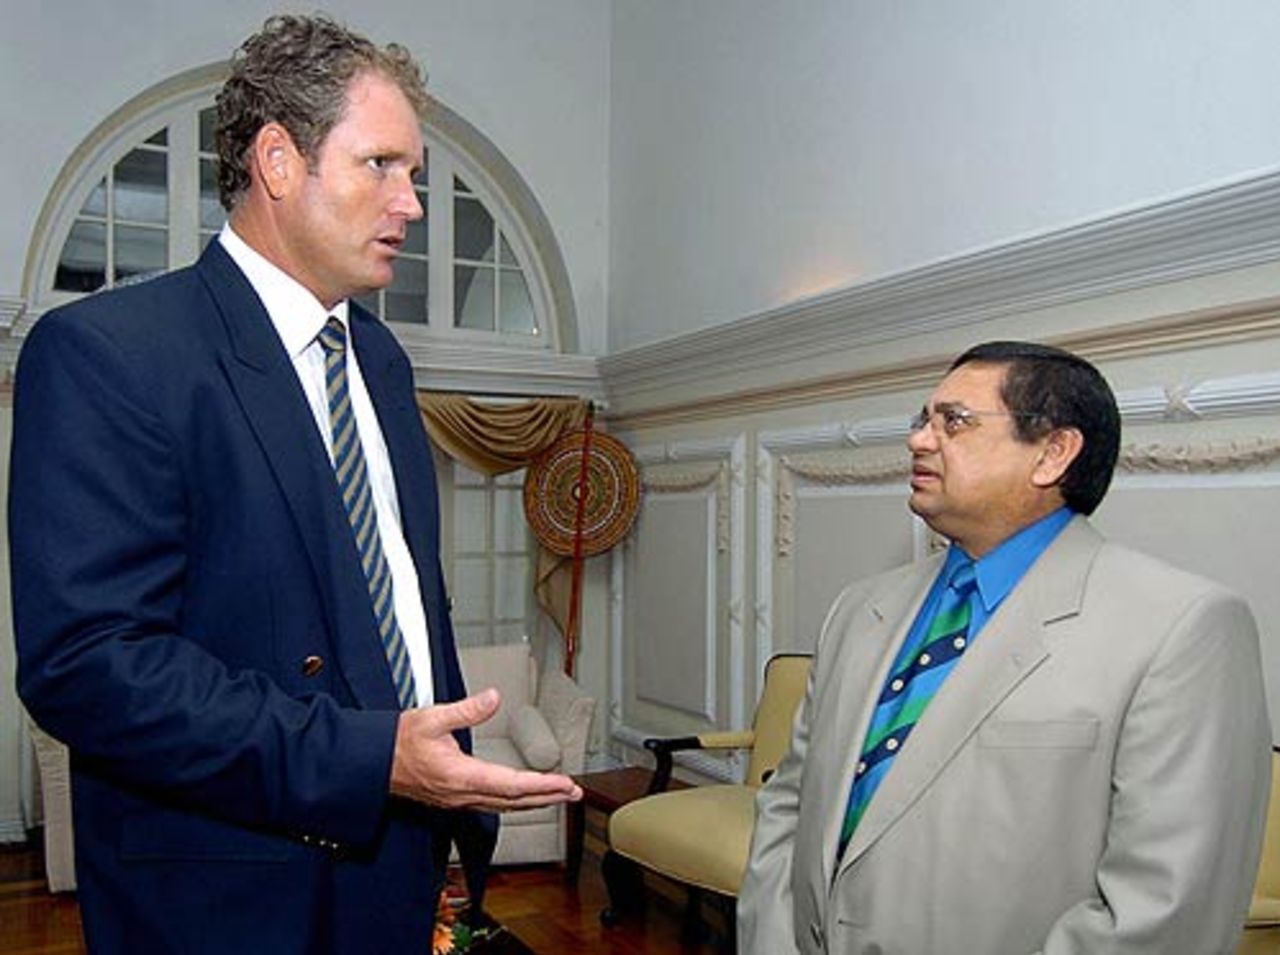 Tom Moody talks to Percy Sonn, the ICC president, during a function at the president's house, Colombo, August 21, 2006